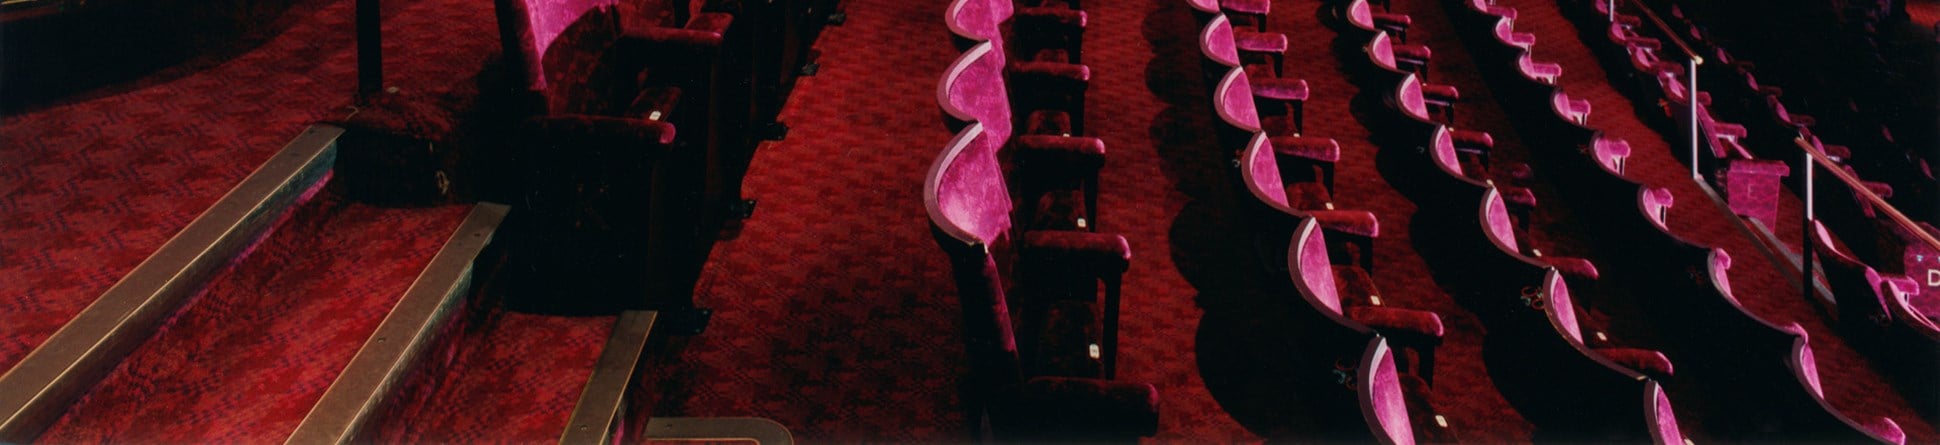 Interior of Prince Edward Theatre, London.  View of auditotrium at dress circle level, across seating showing rake. 